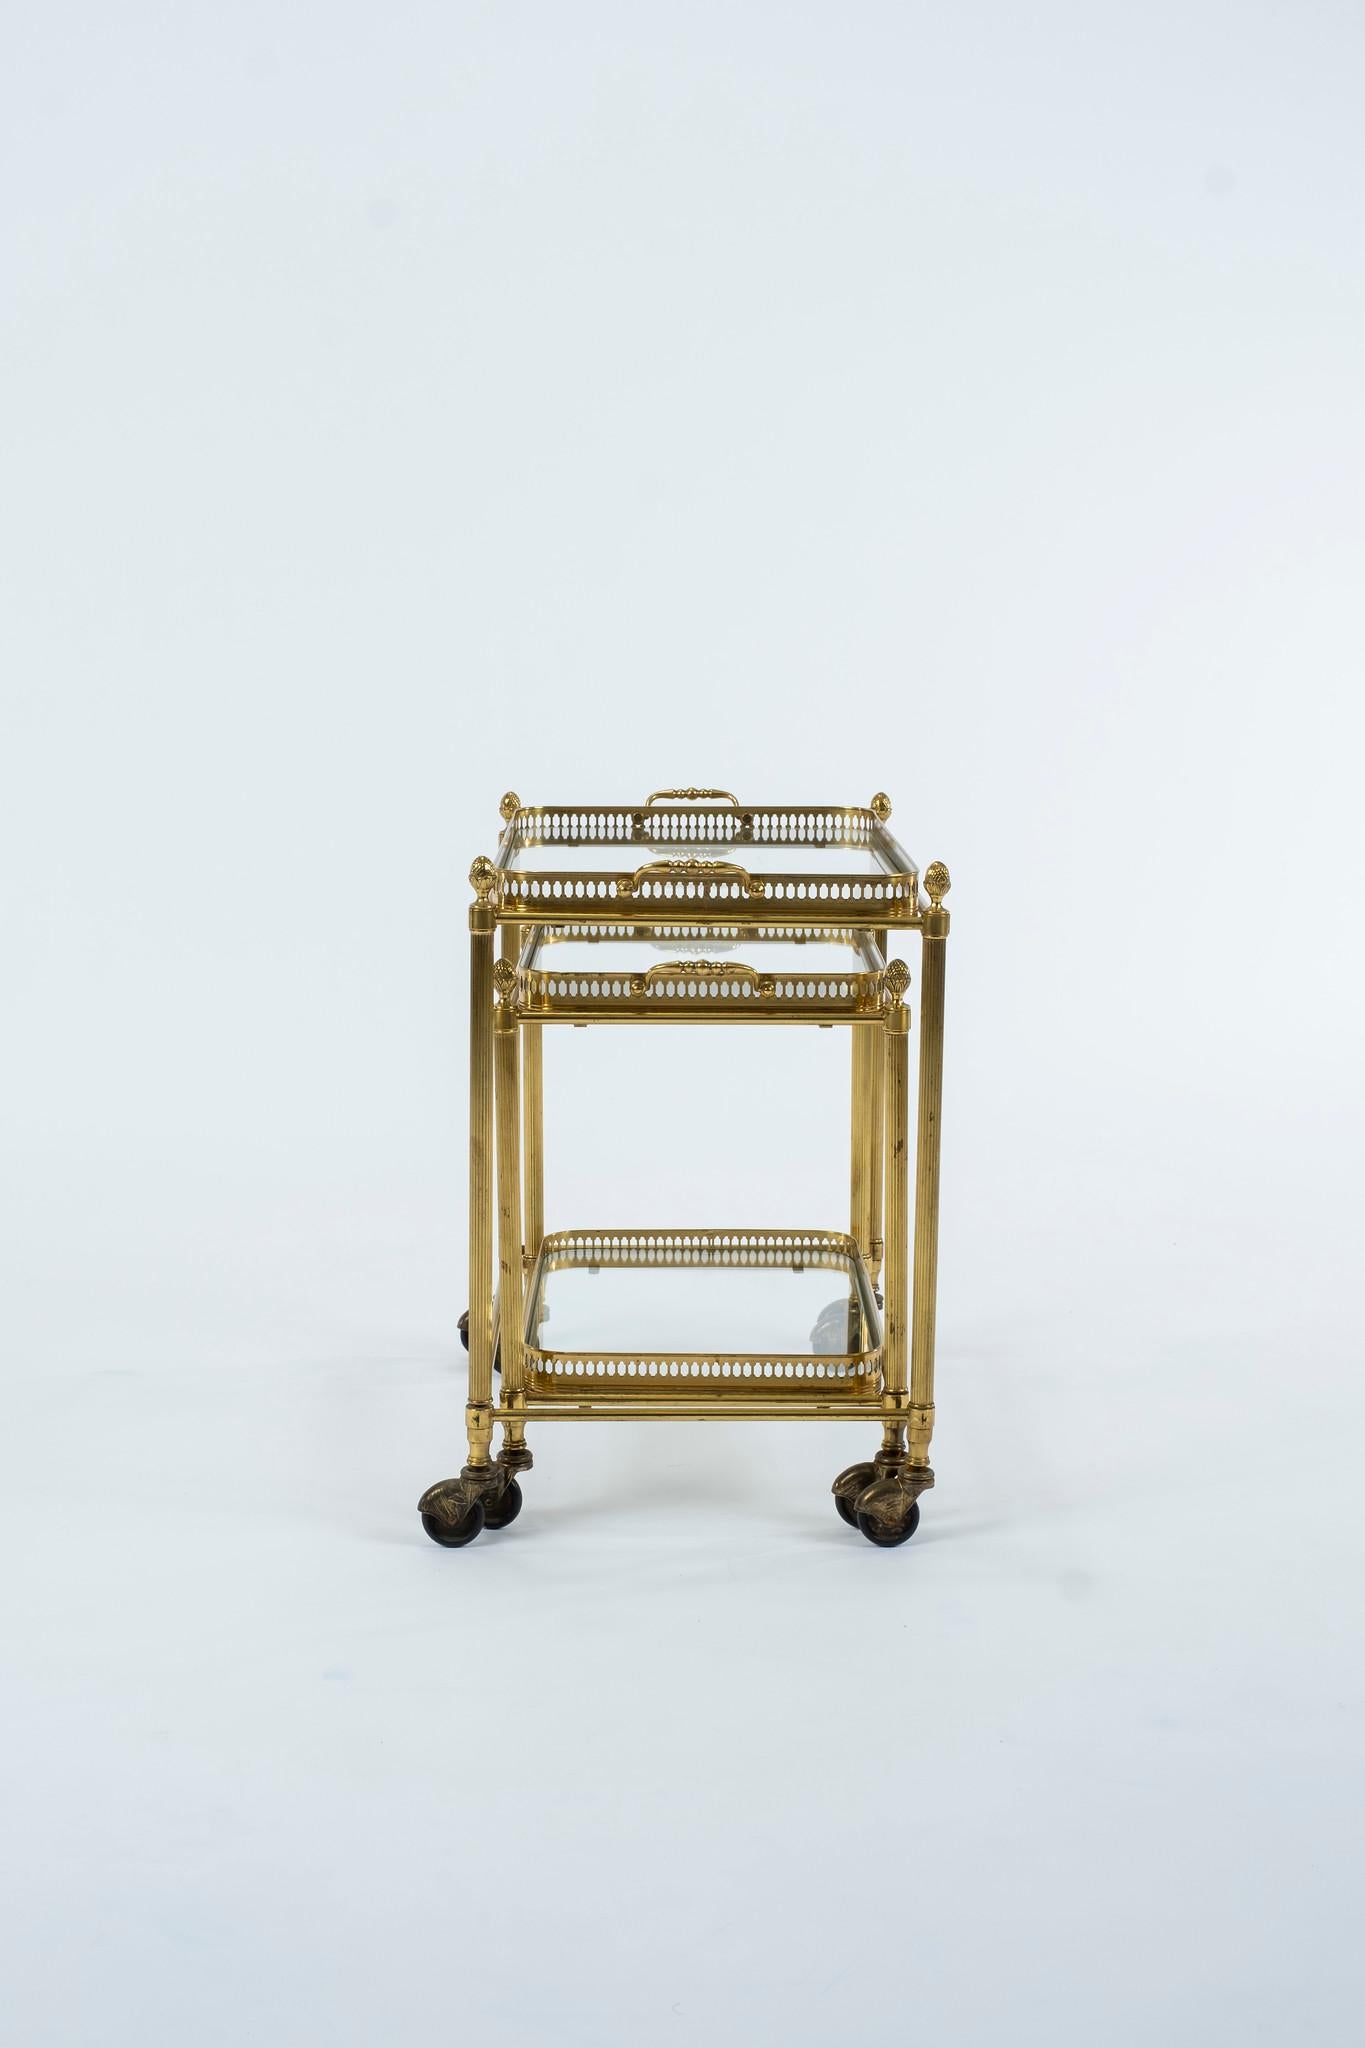 A vintage pair of French Louis XVI style brass nesting tables on casters with removable glass tray tops. These tables would work wonderfully as low lying bar carts.